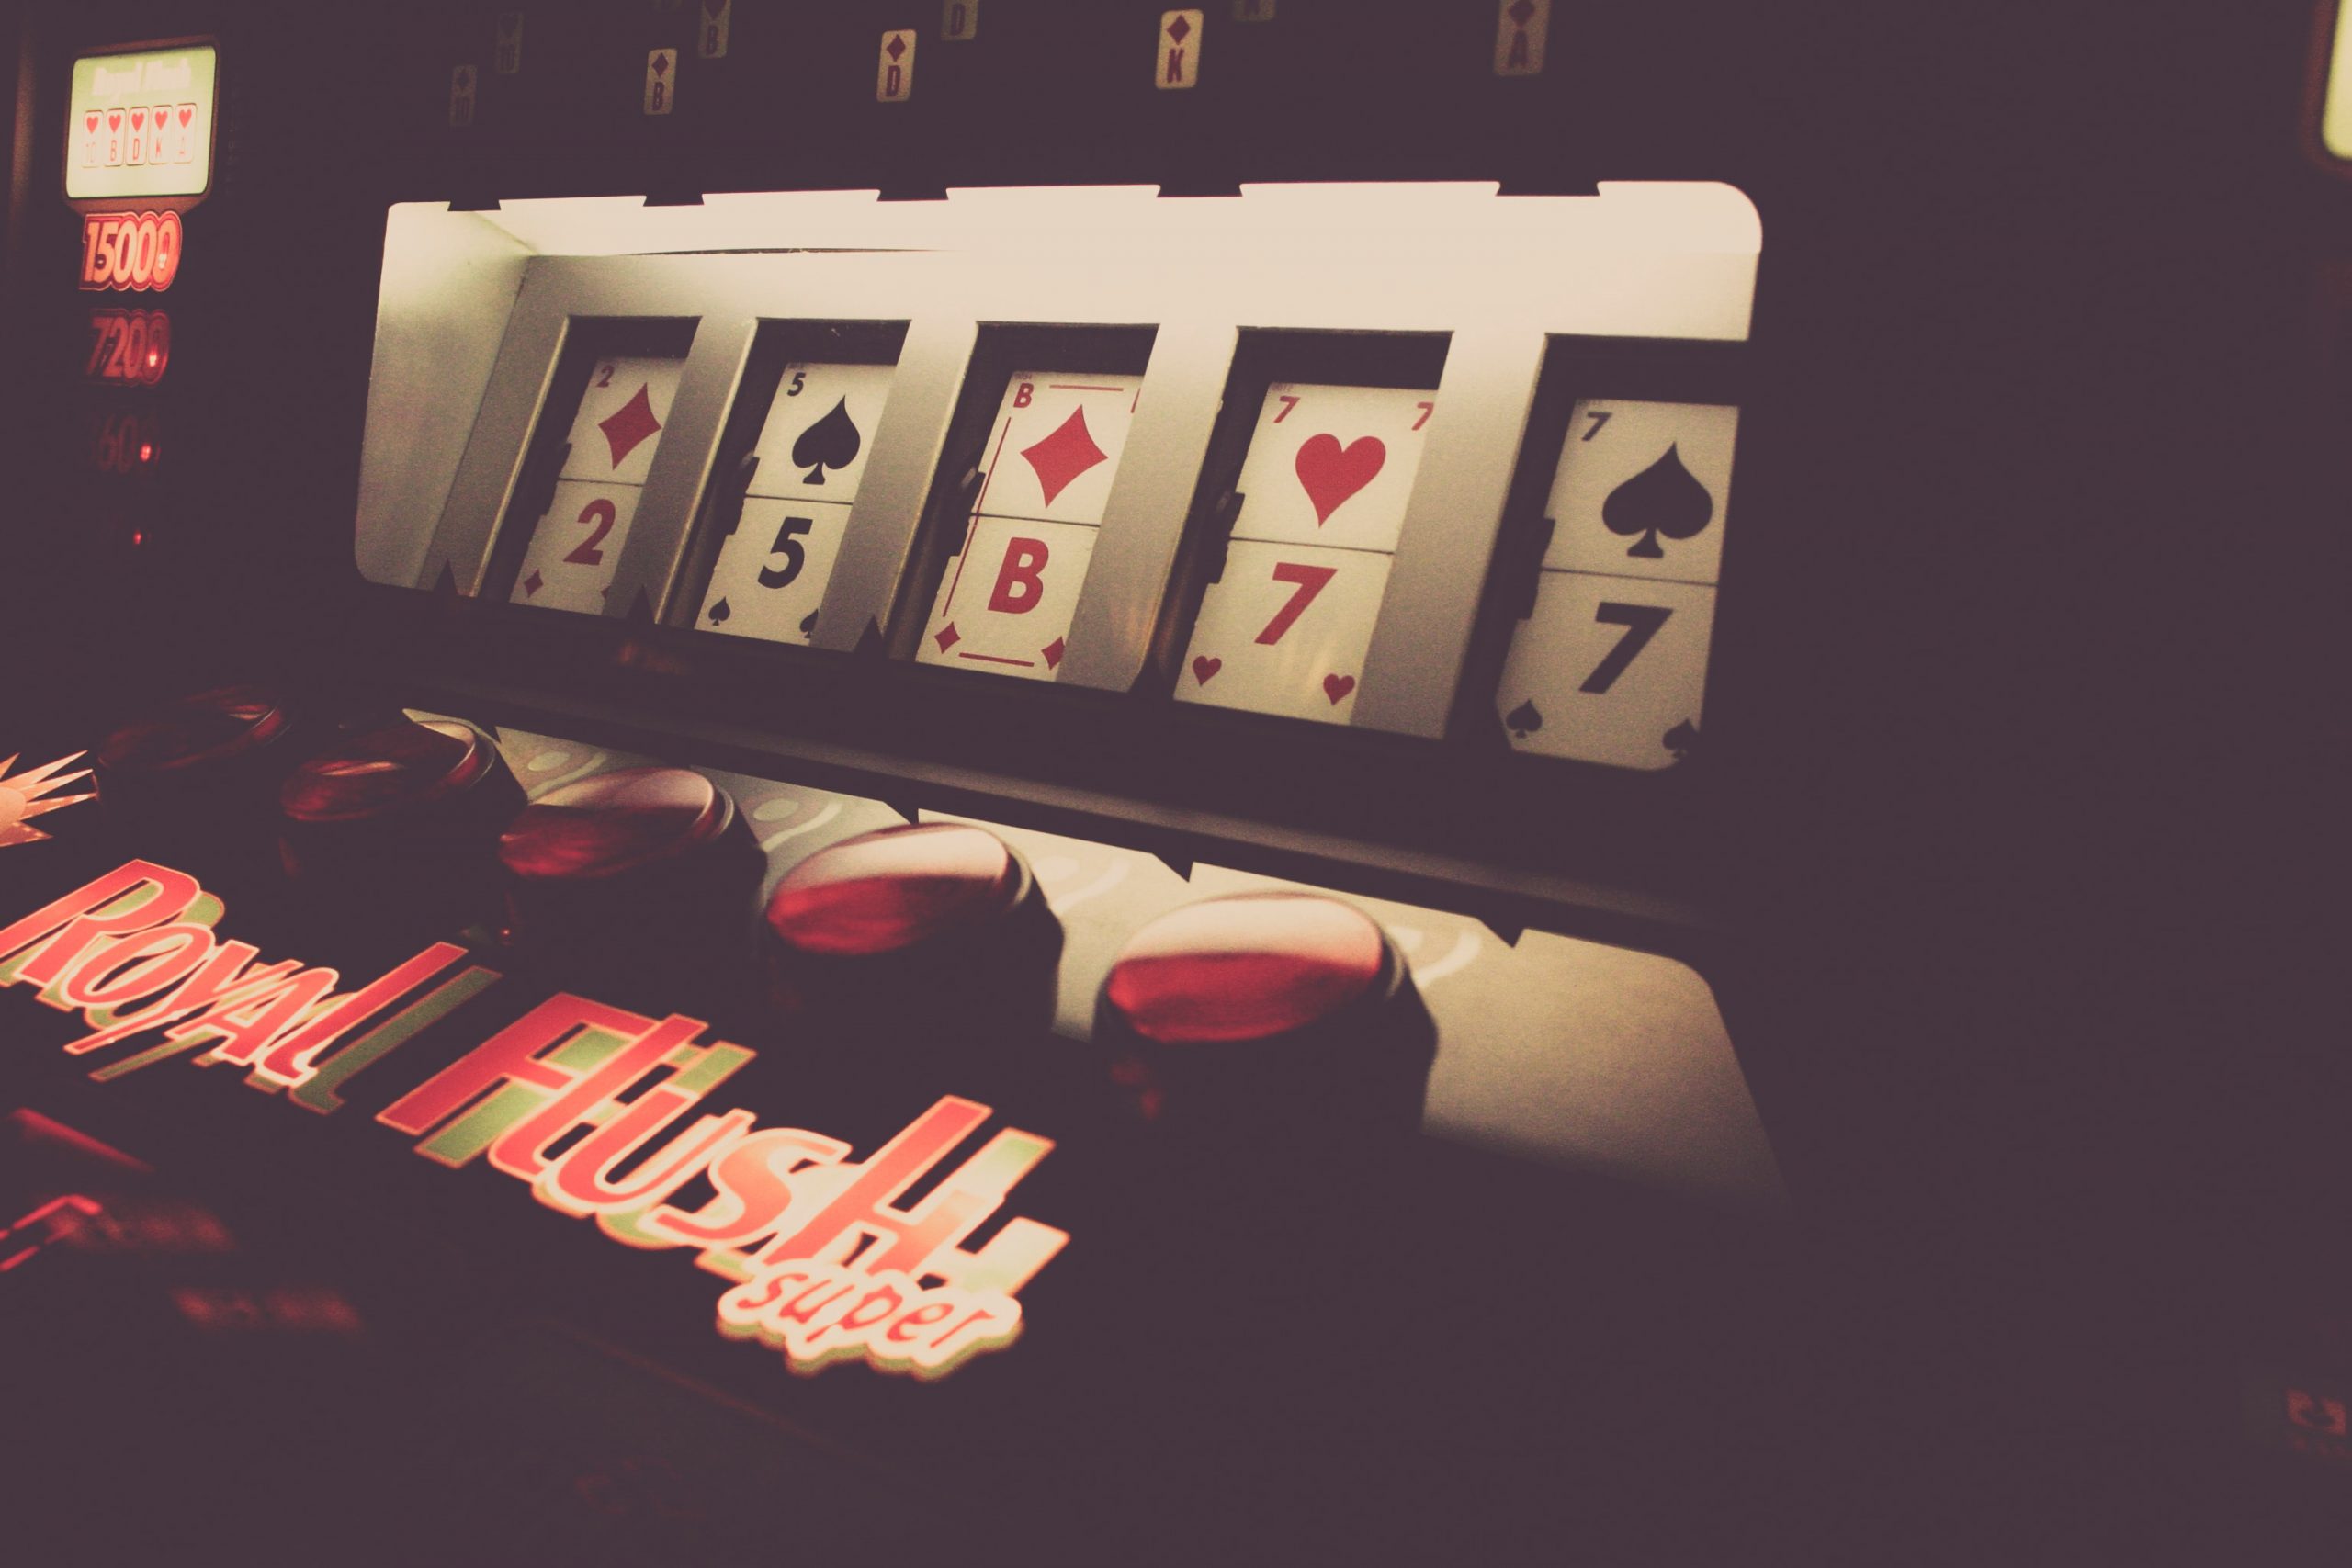 Casino tournaments give you the chance to win good money